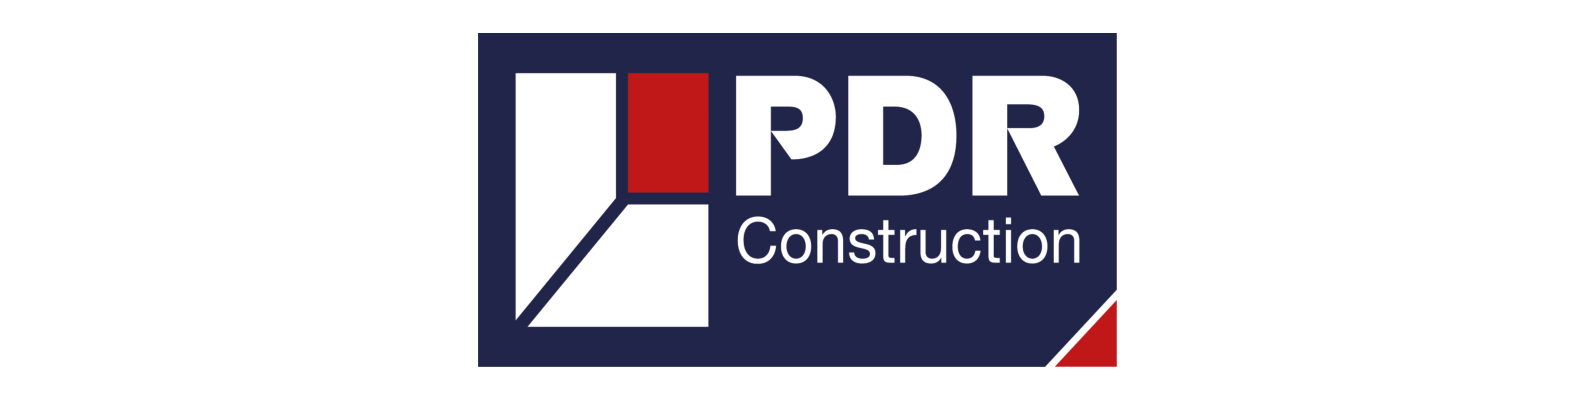 logo of PDR construction